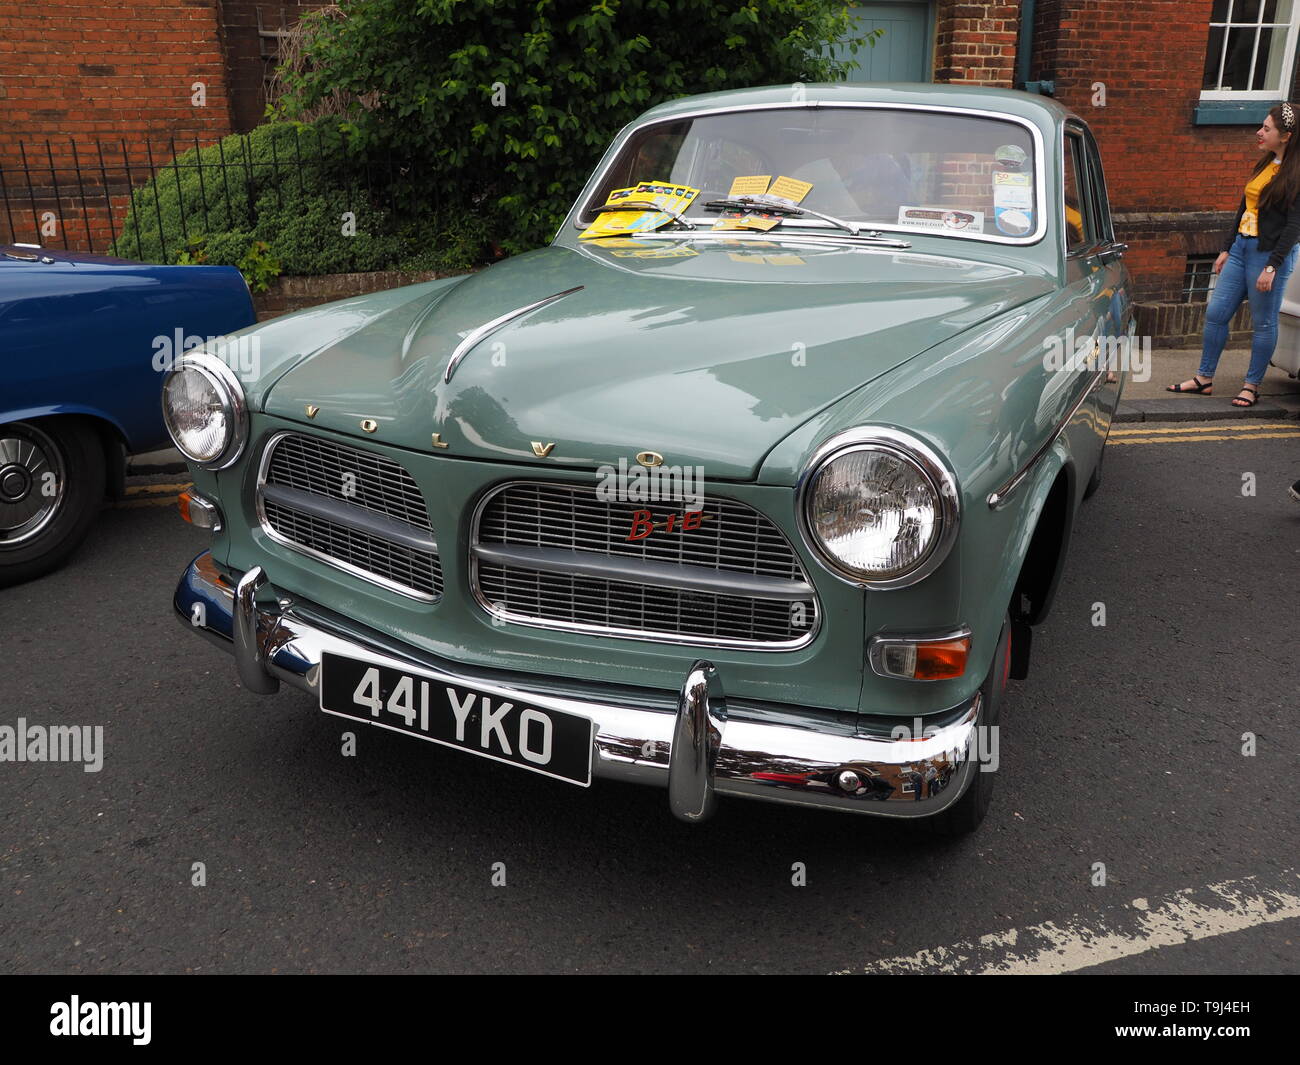 Faversham, Kent, UK. 19th May, 2019. 25th Faversham Transport Weekend: the second day of this annual transport festival now in its 25th year showcasing a wide range of vintage cars and vehicles. Credit: James Bell/Alamy Live News Stock Photo